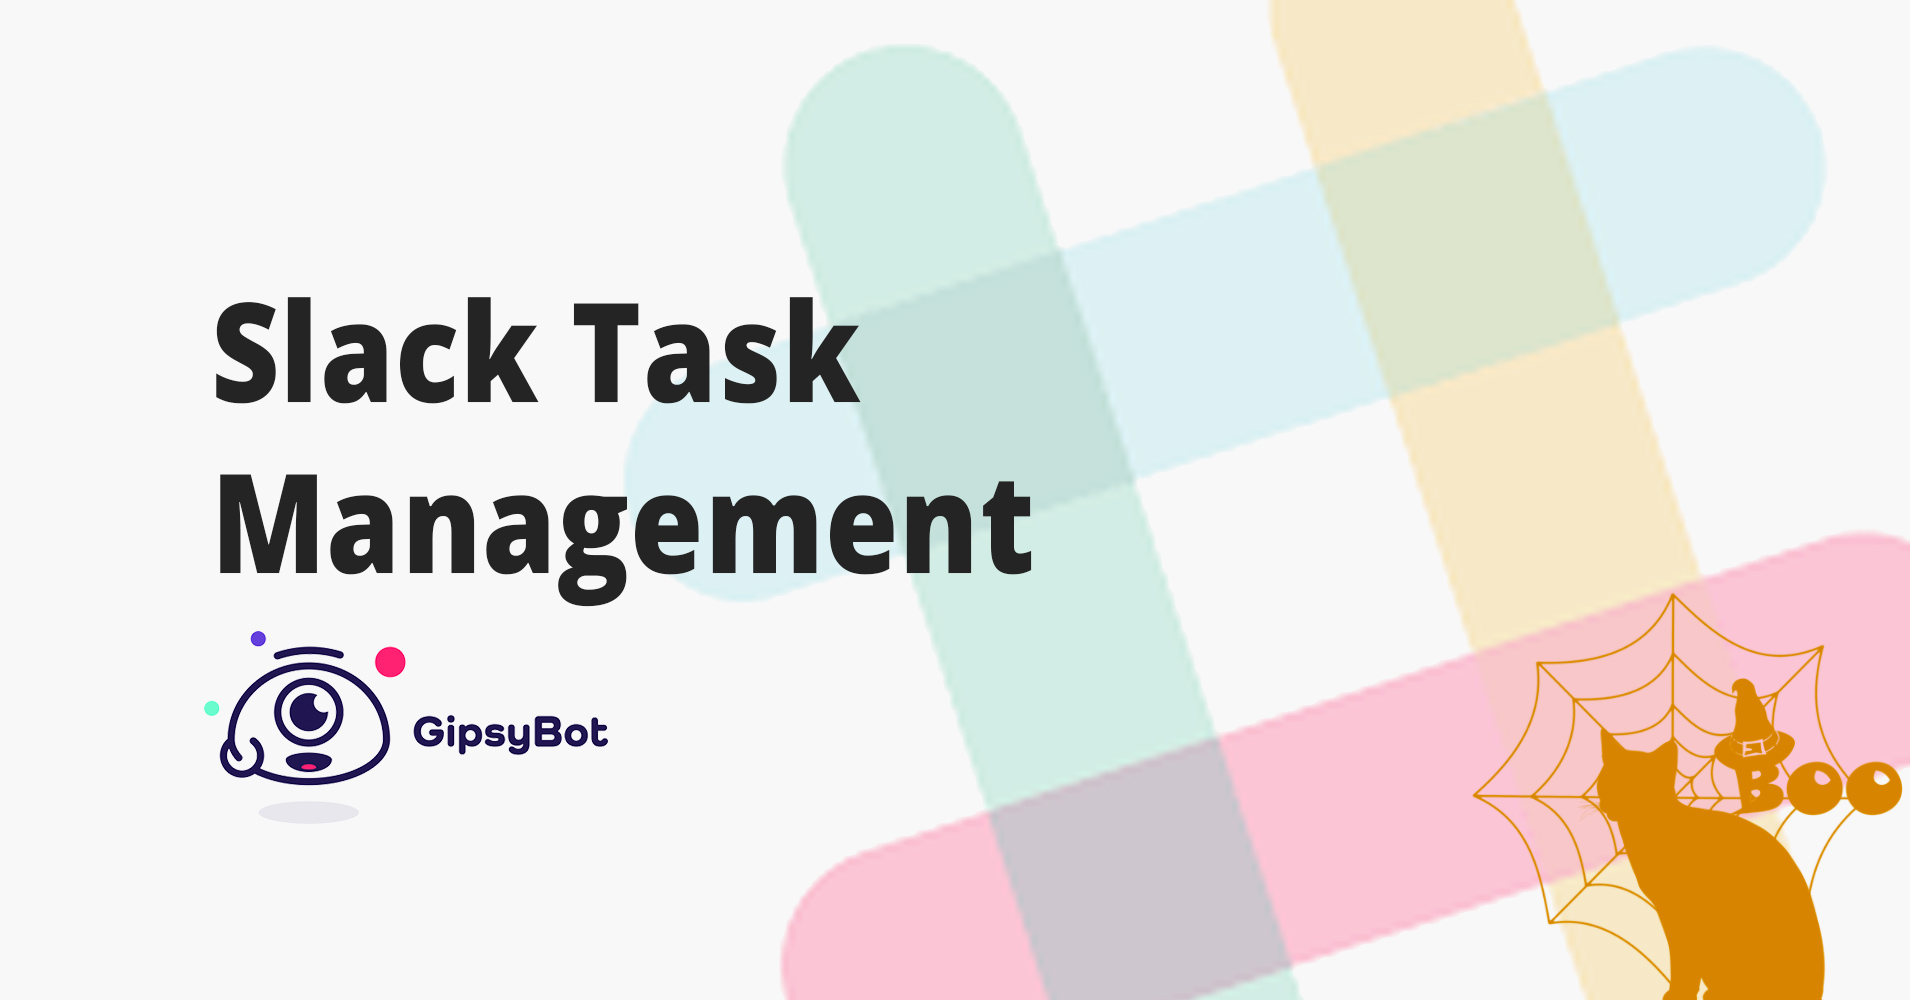 Slack task management - how to effectively manage to-do’s with Slack